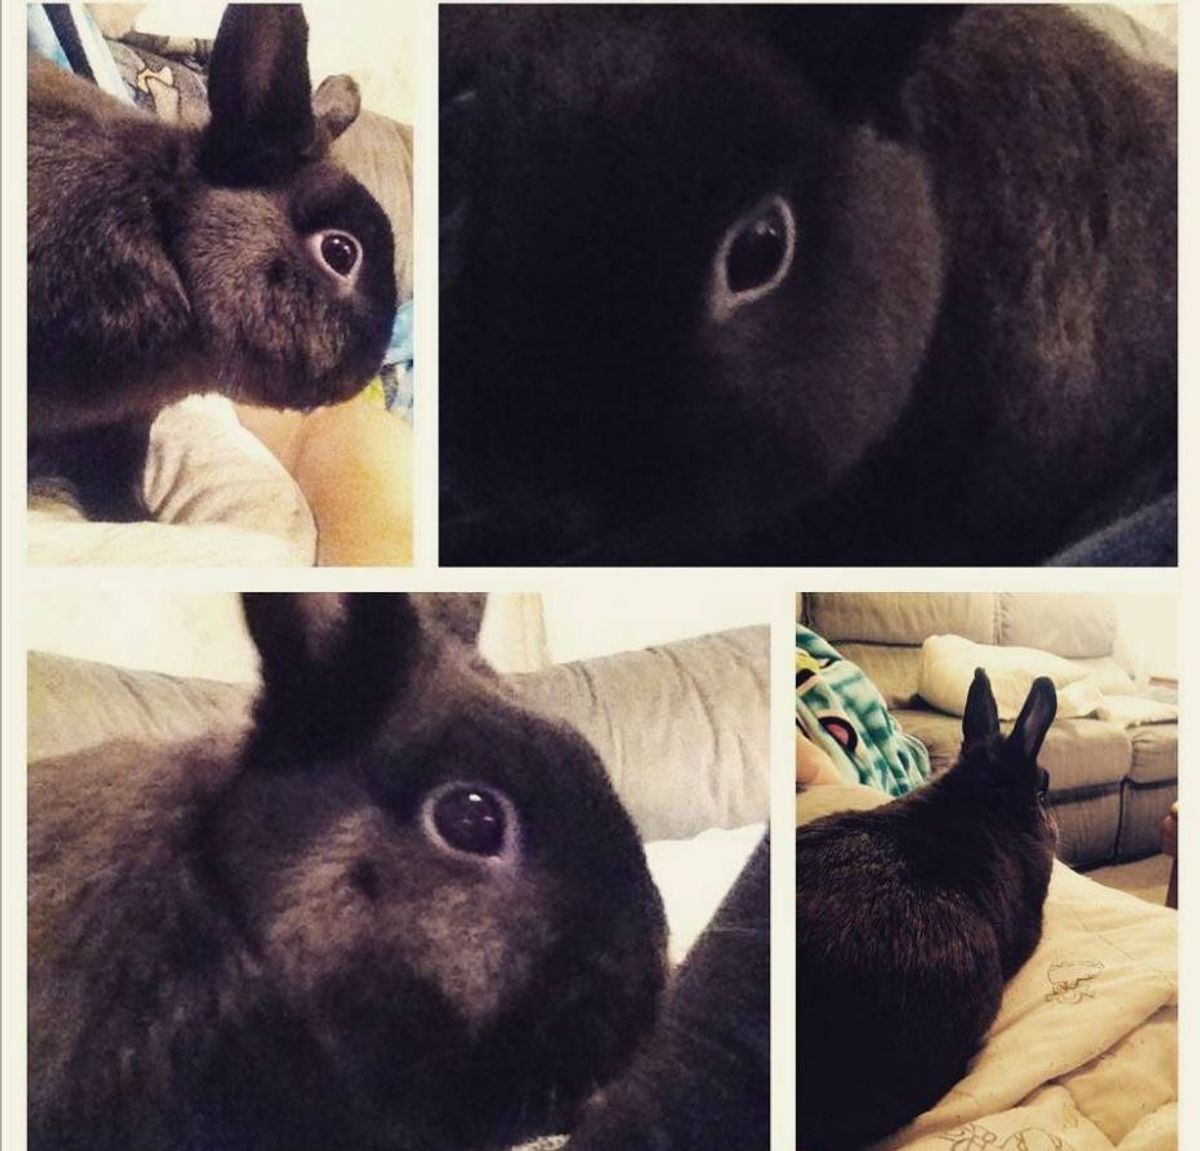 Why Am I So Obsessed With Rabbits?